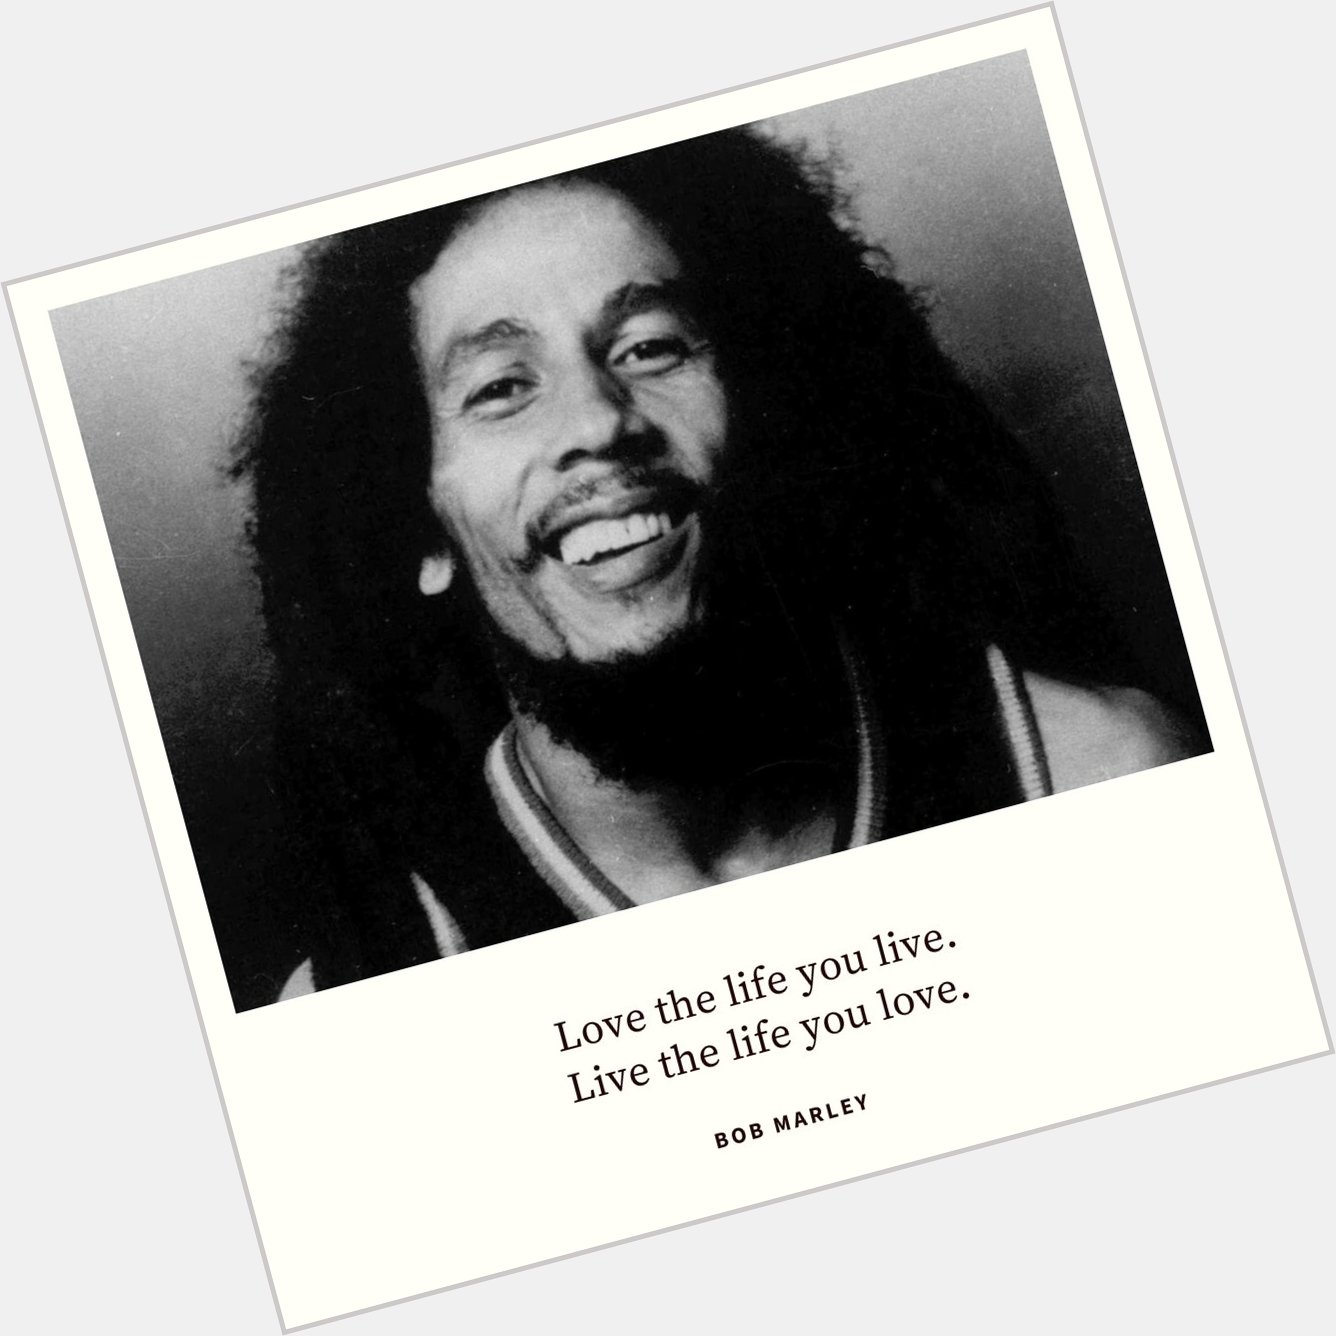 Happy Birthday, Bob Marley! Today we remember the life of the singer:  